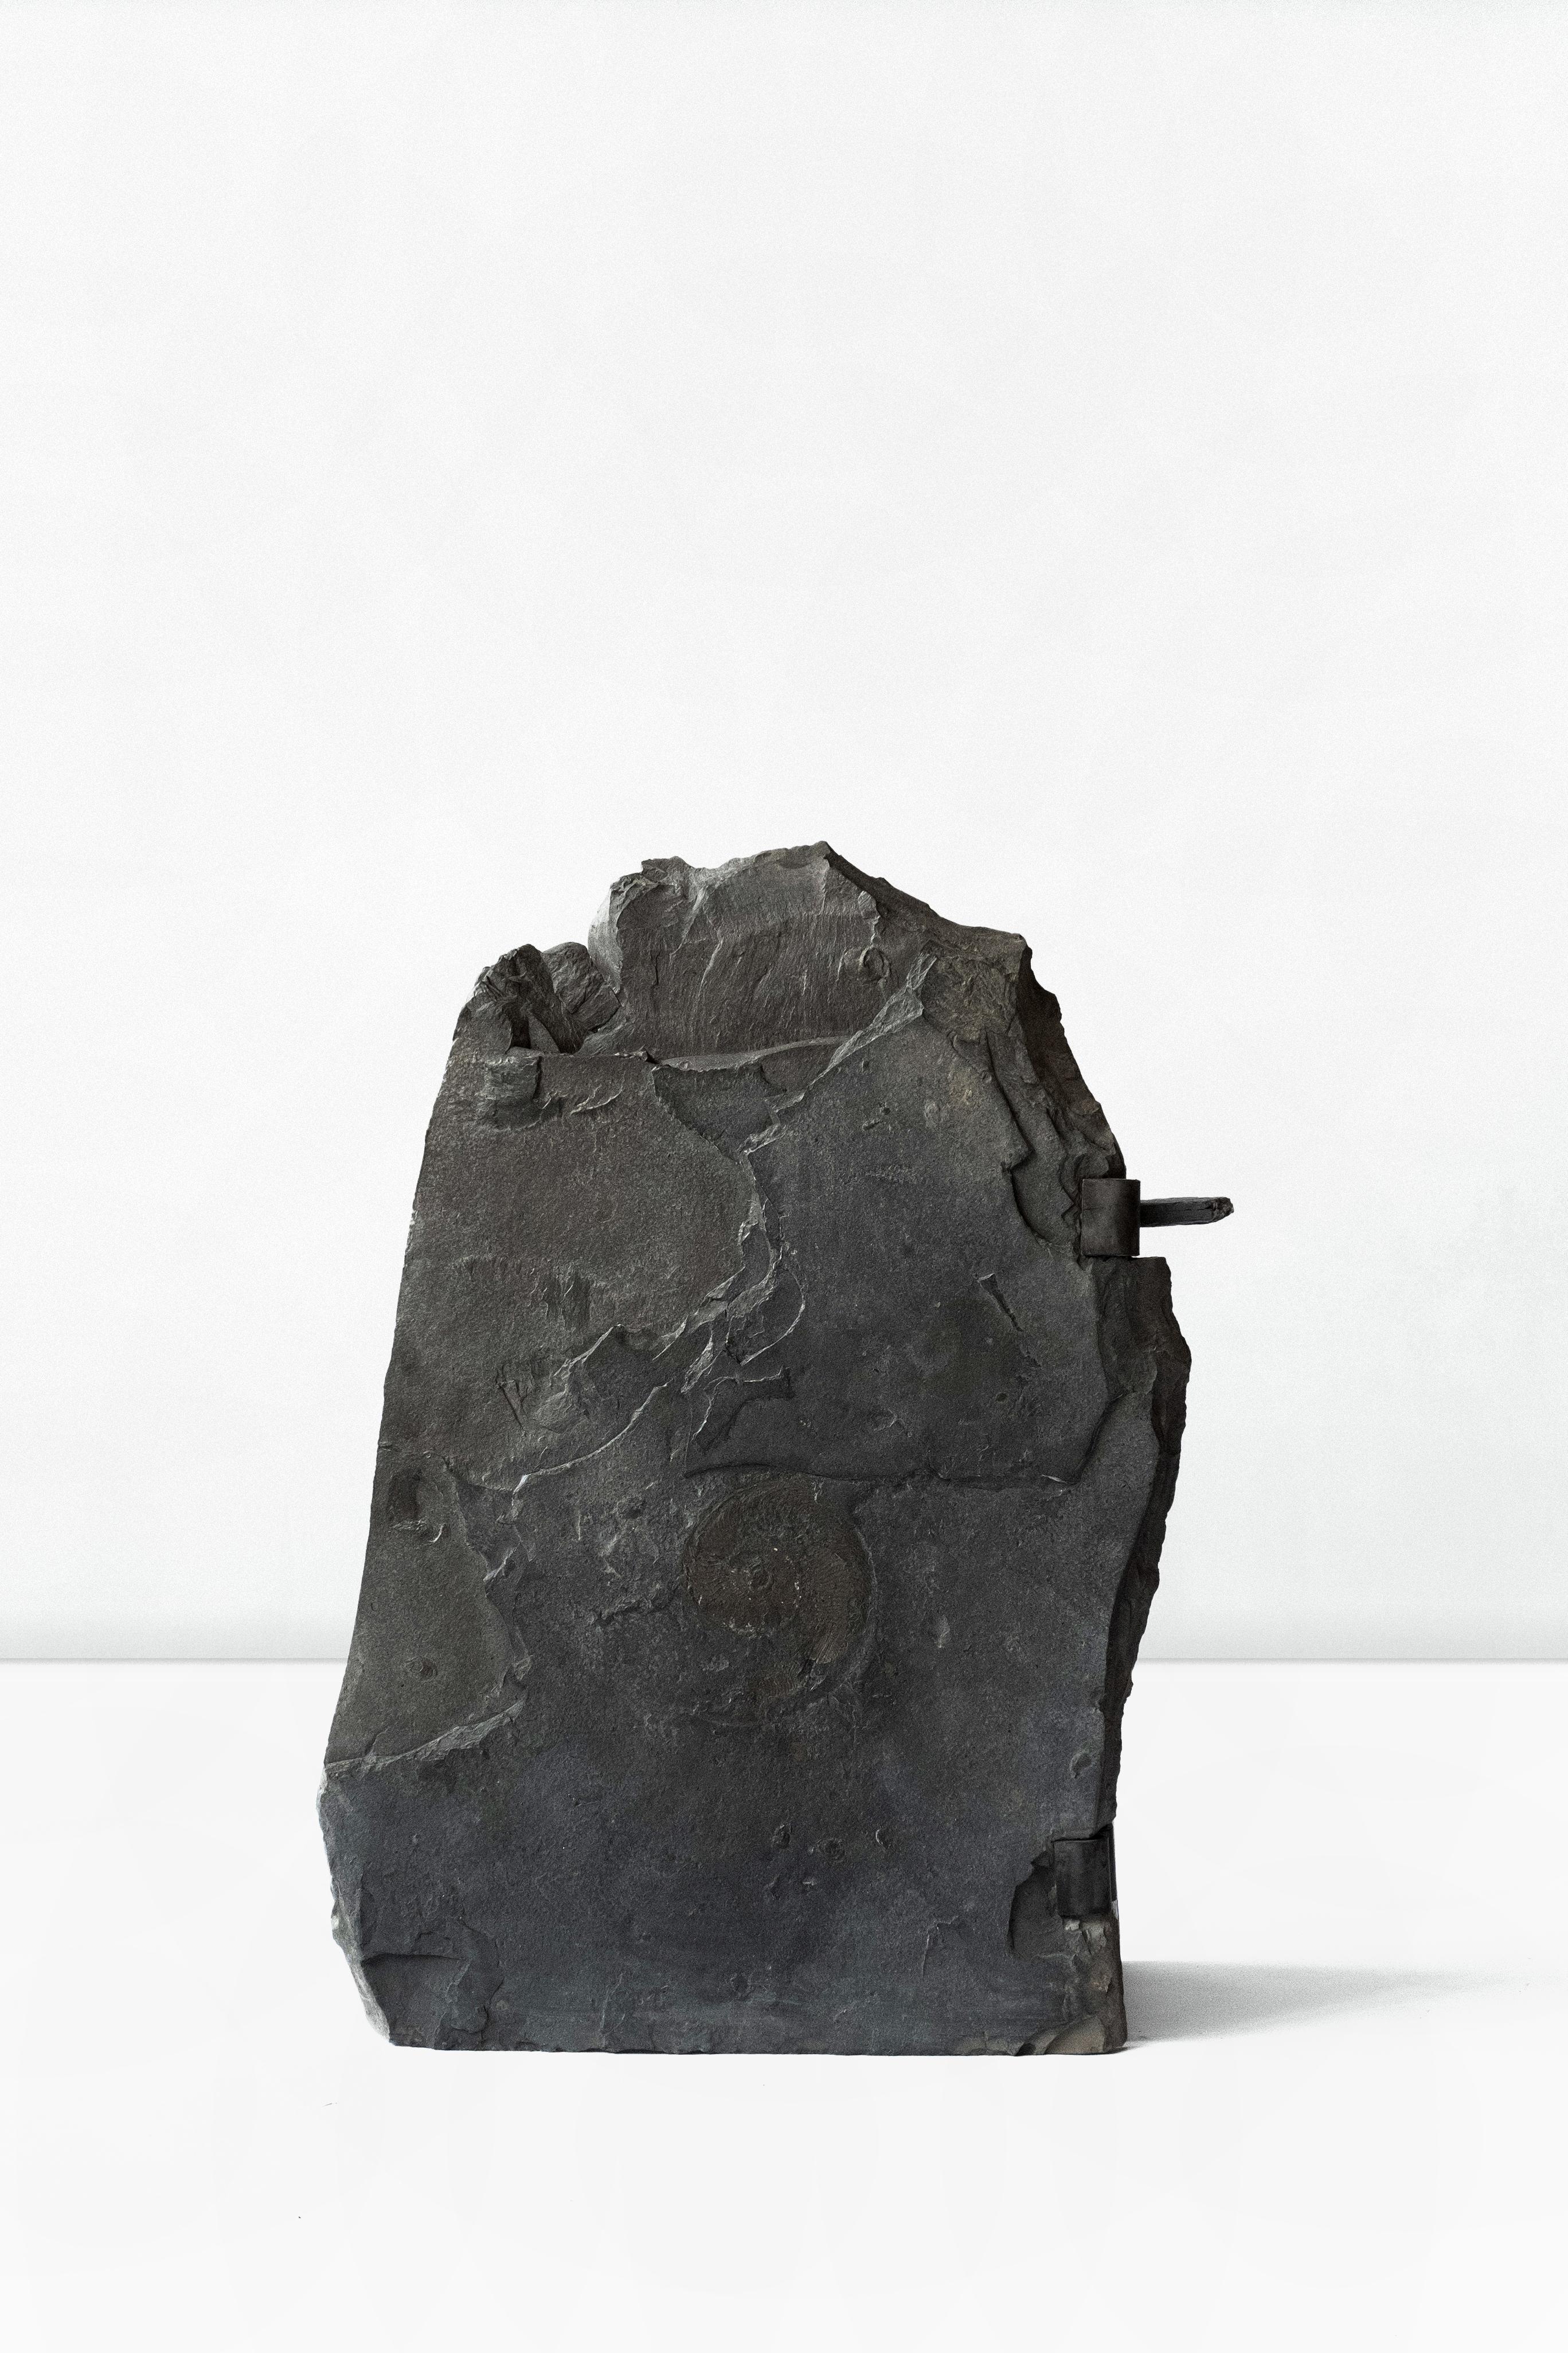 Burnished Contemporary Stone Object Console in Slate Stone & Metal For Sale